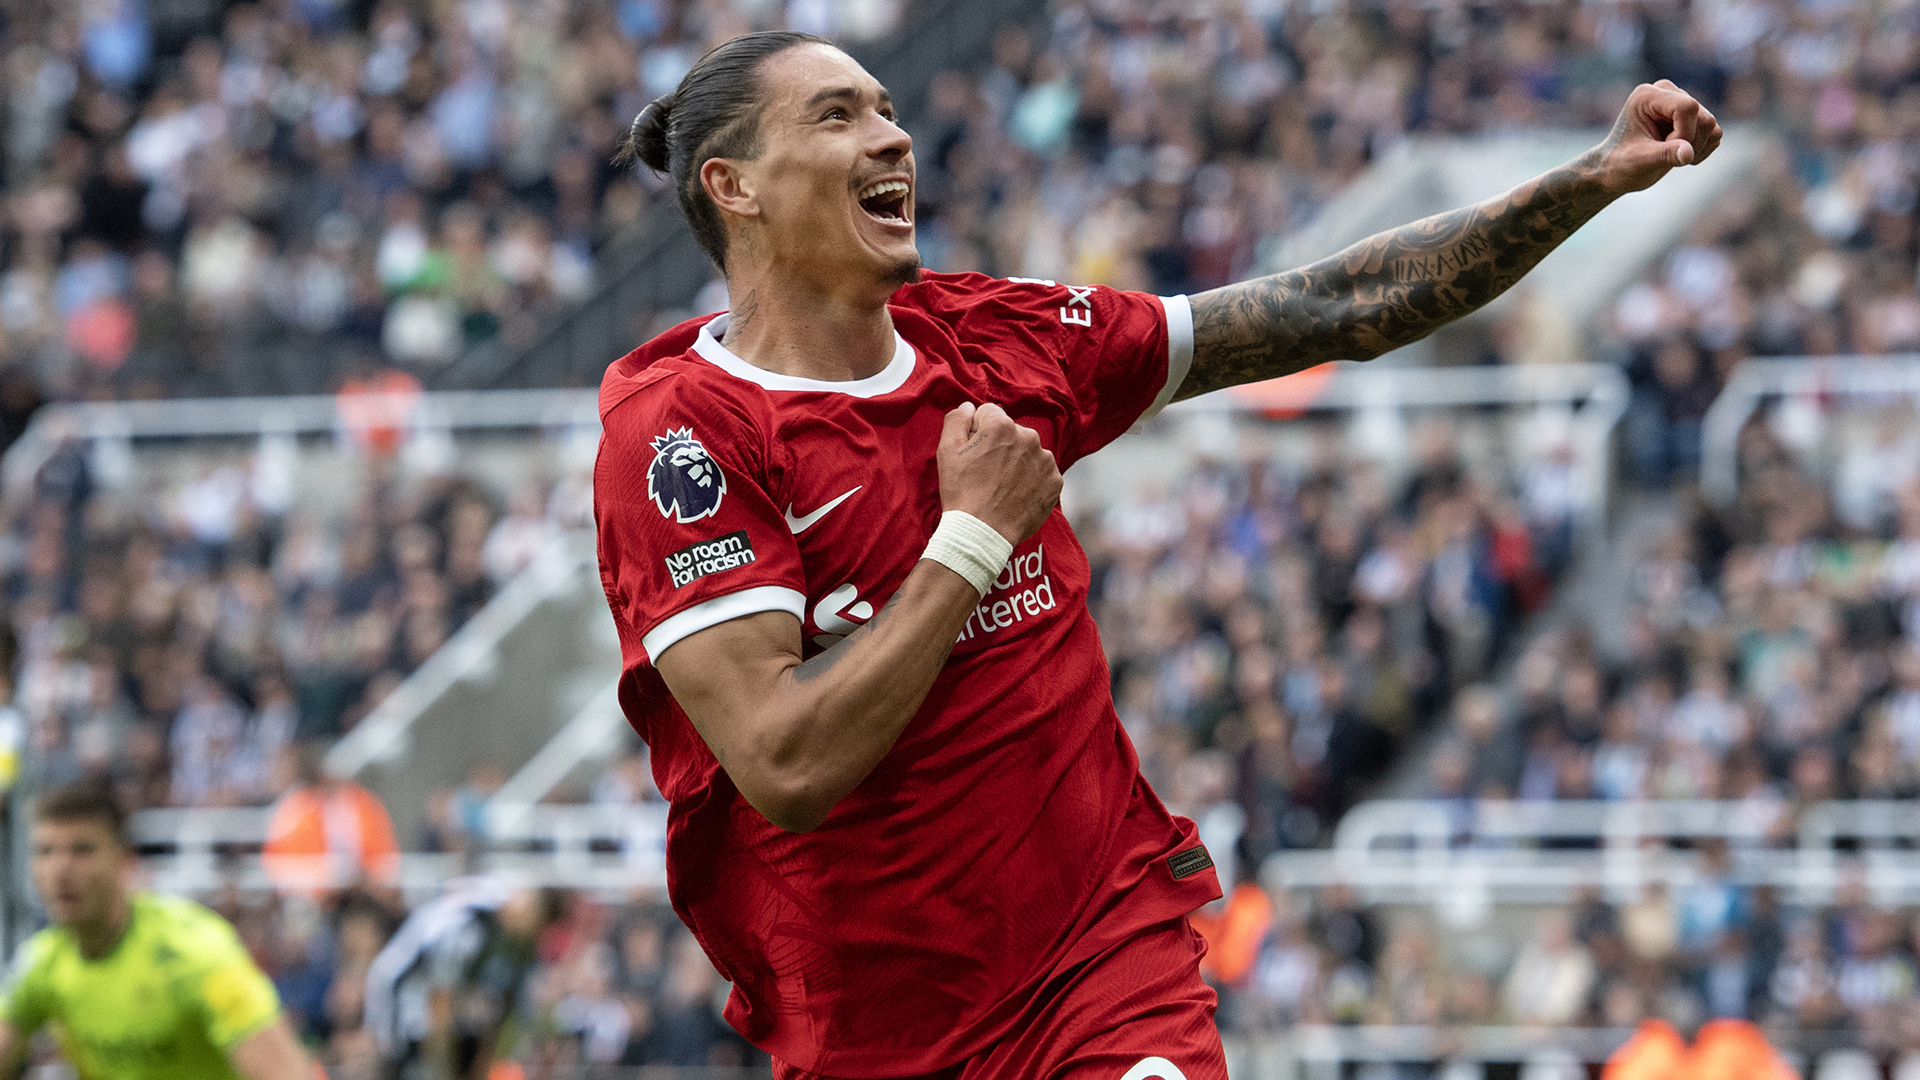 Darwin Nunez of Liverpool celebrates scoring the winning goal during the Premier League match between Newcastle United and Liverpool FC at St. James Park on August 27, 2023 in Newcastle upon Tyne, England.